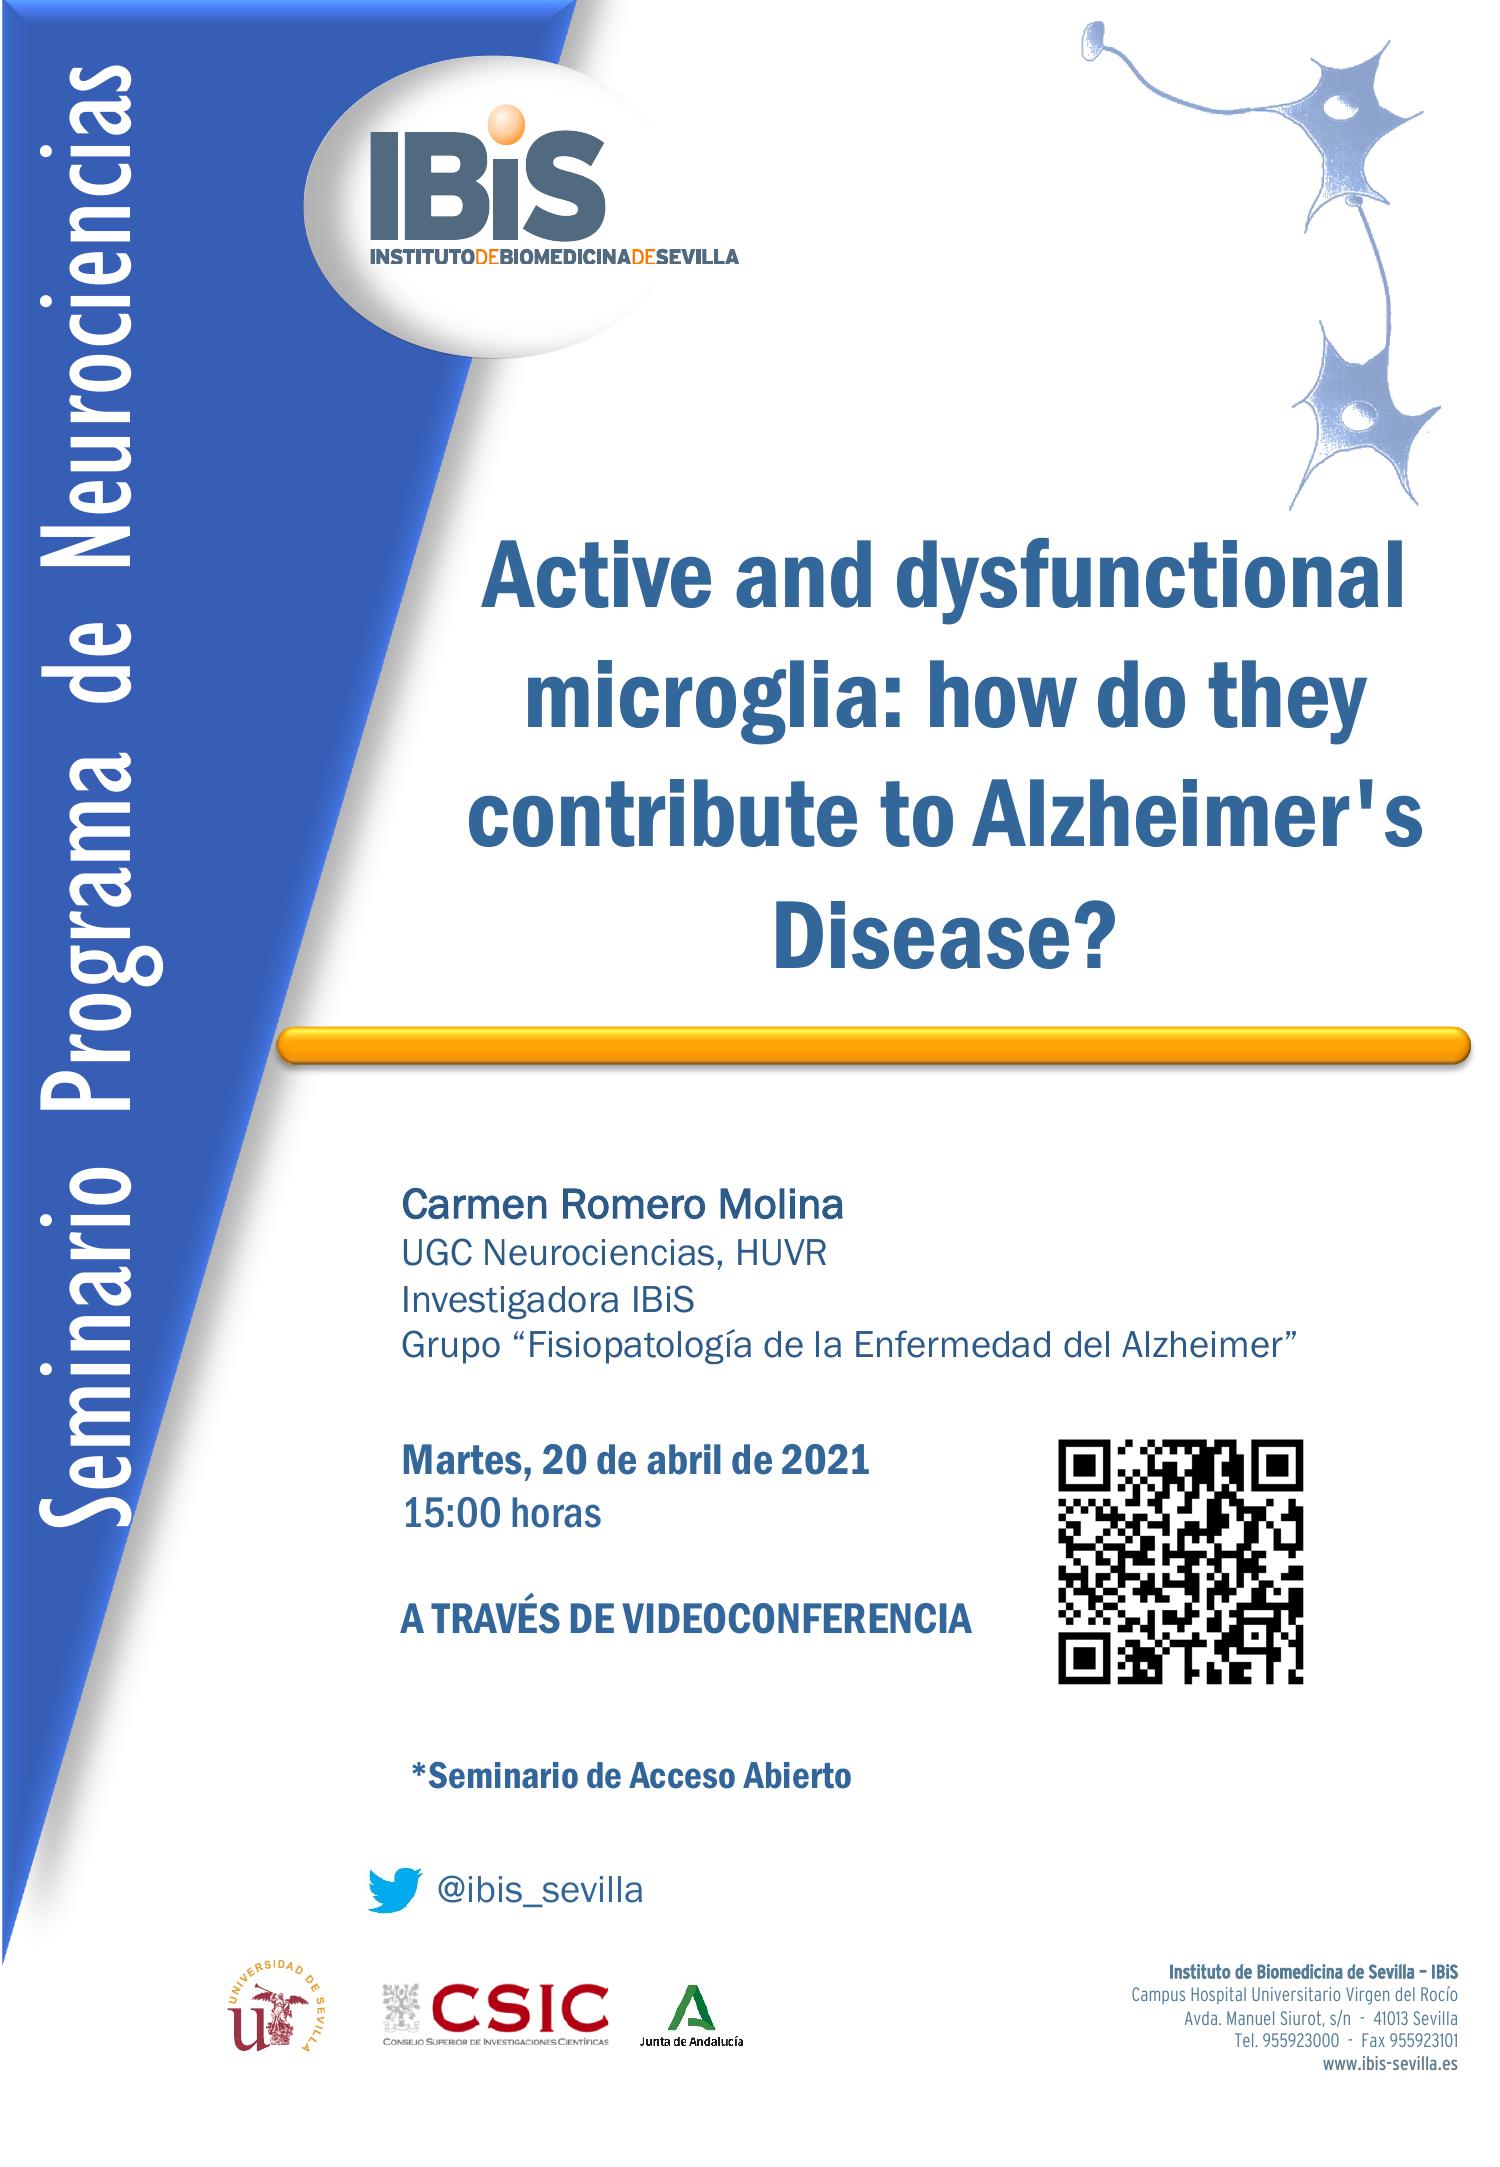 Poster: Active and dysfunctional microglia: how do they contribute to Alzheimer's Disease?